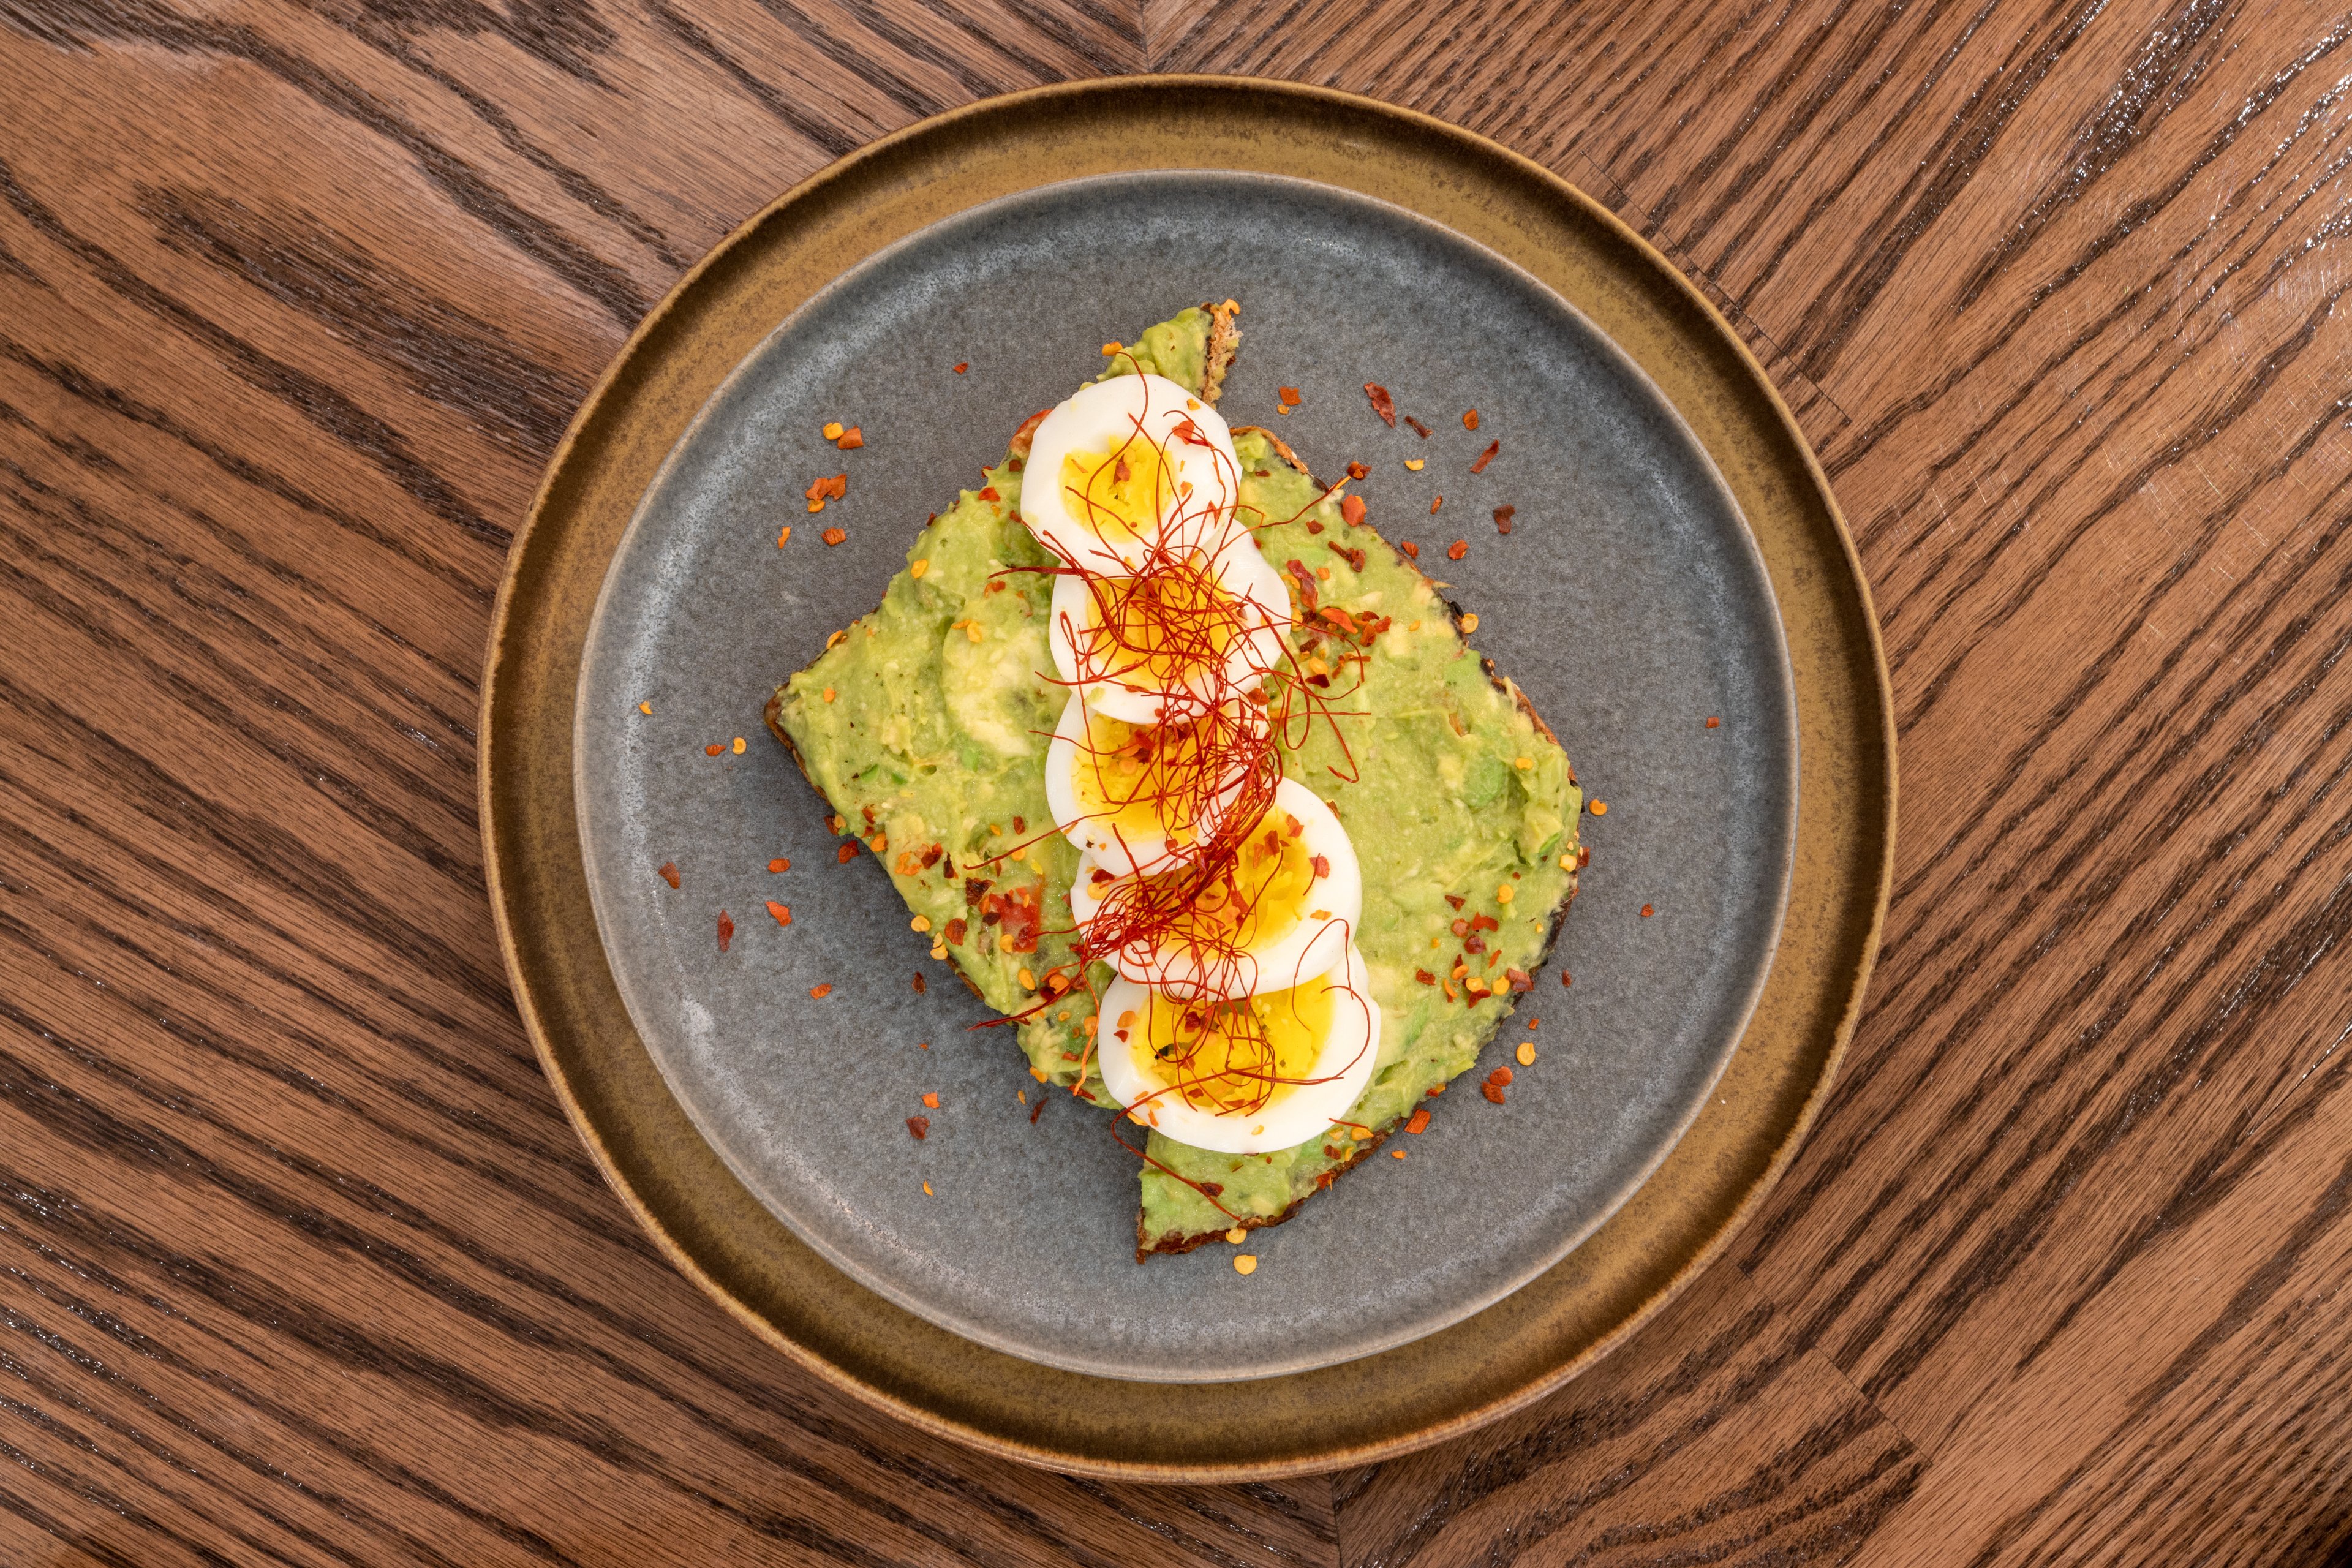 The avocado toast is the perfect way to start your day.